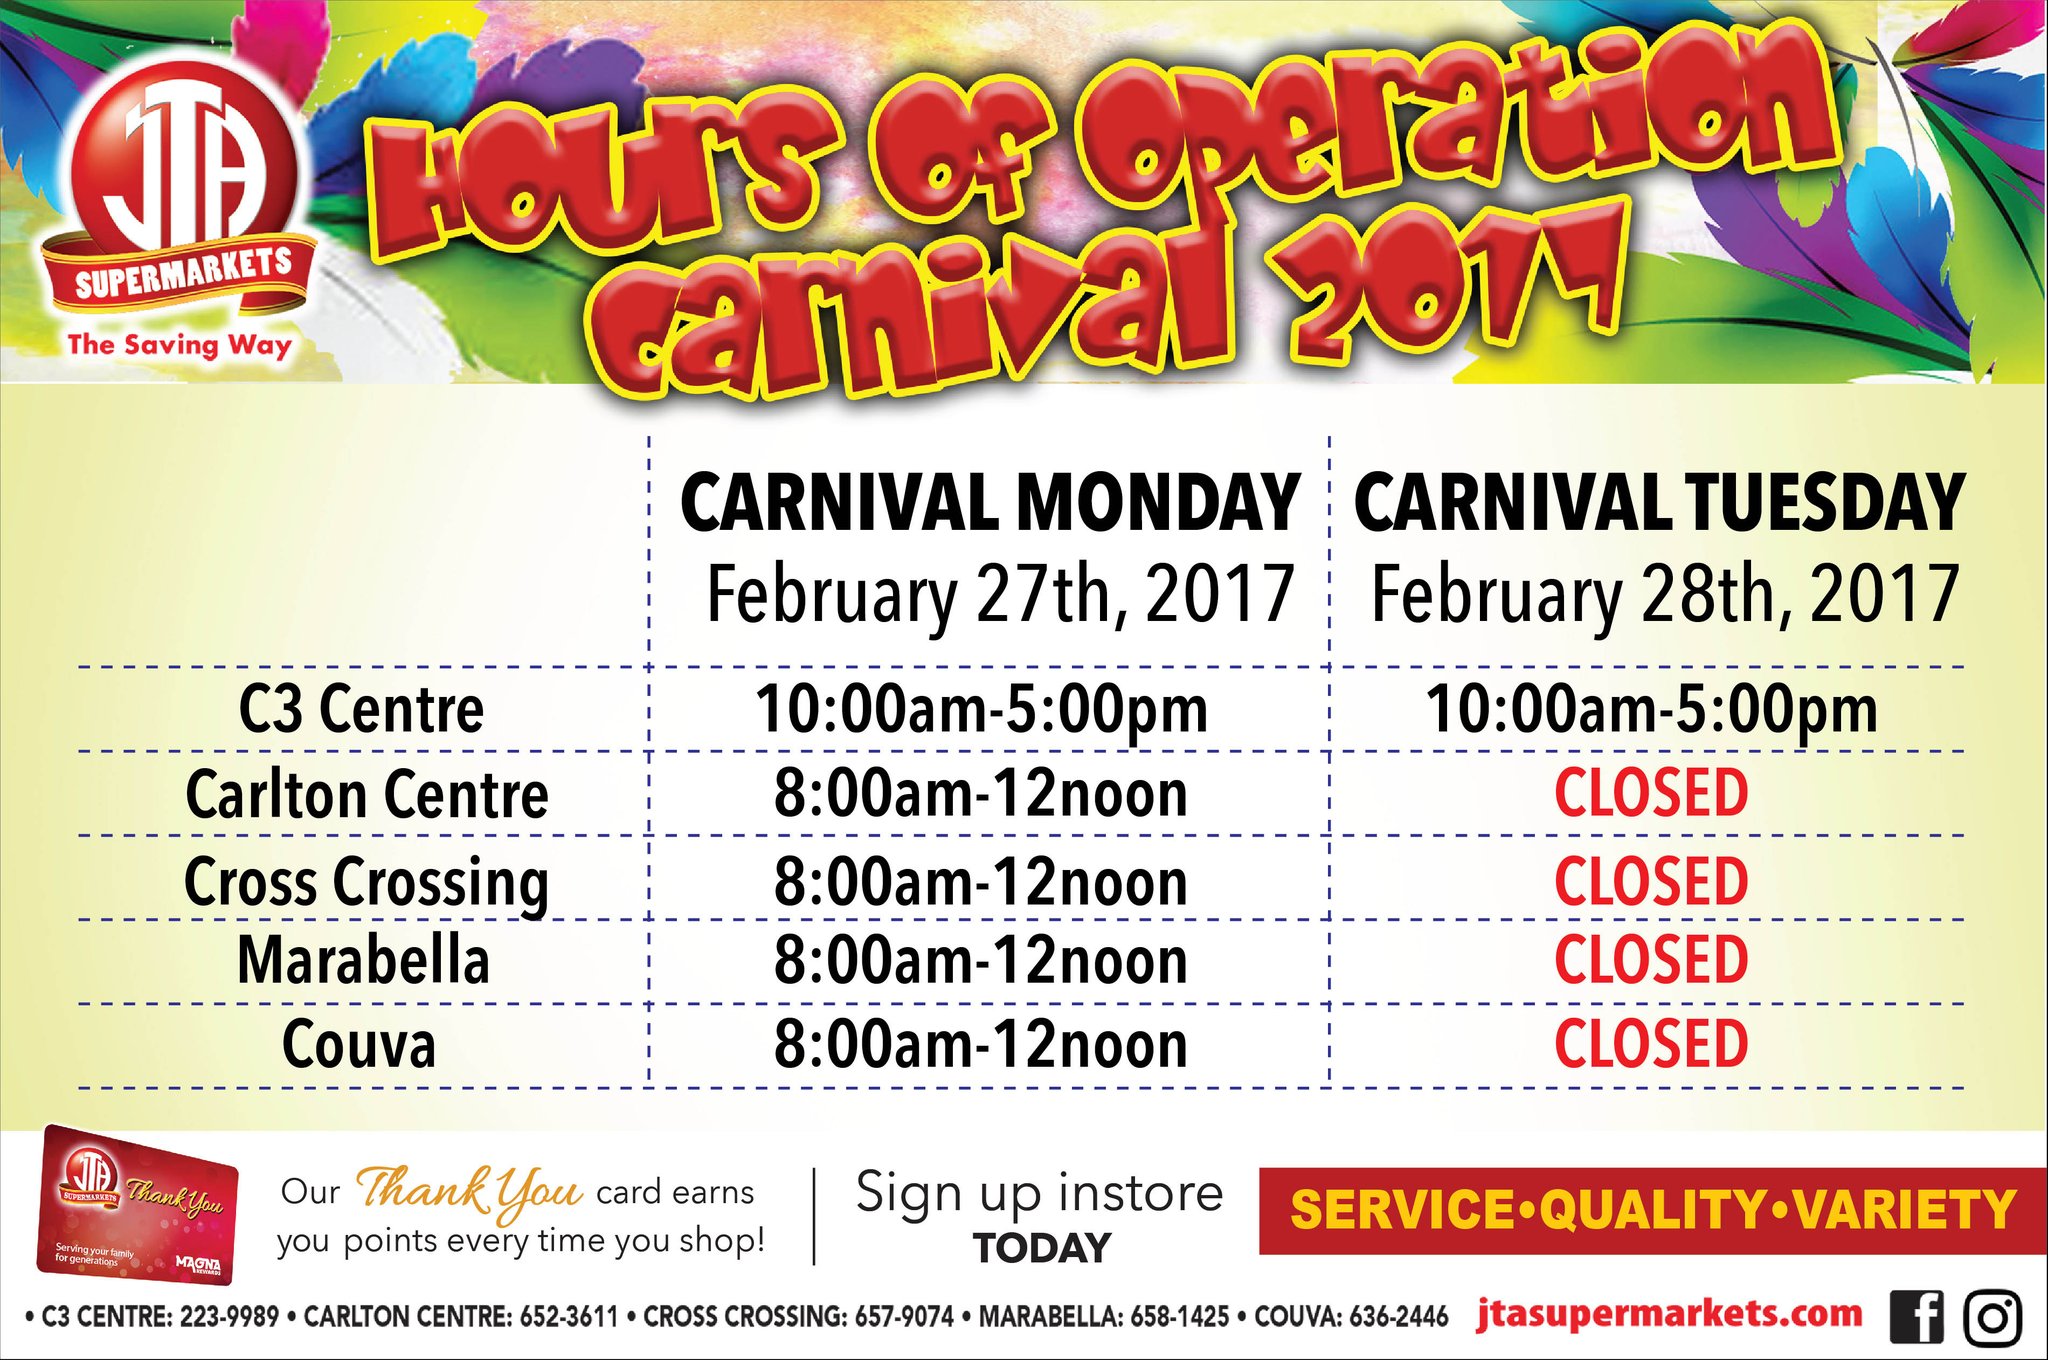 C3centre Jta Supermarkets Is Open This Carnival Weekend See Their Image For Opening Hours C3centre Jtasupermarkets Carnivalhours T Co Fbasi651dw